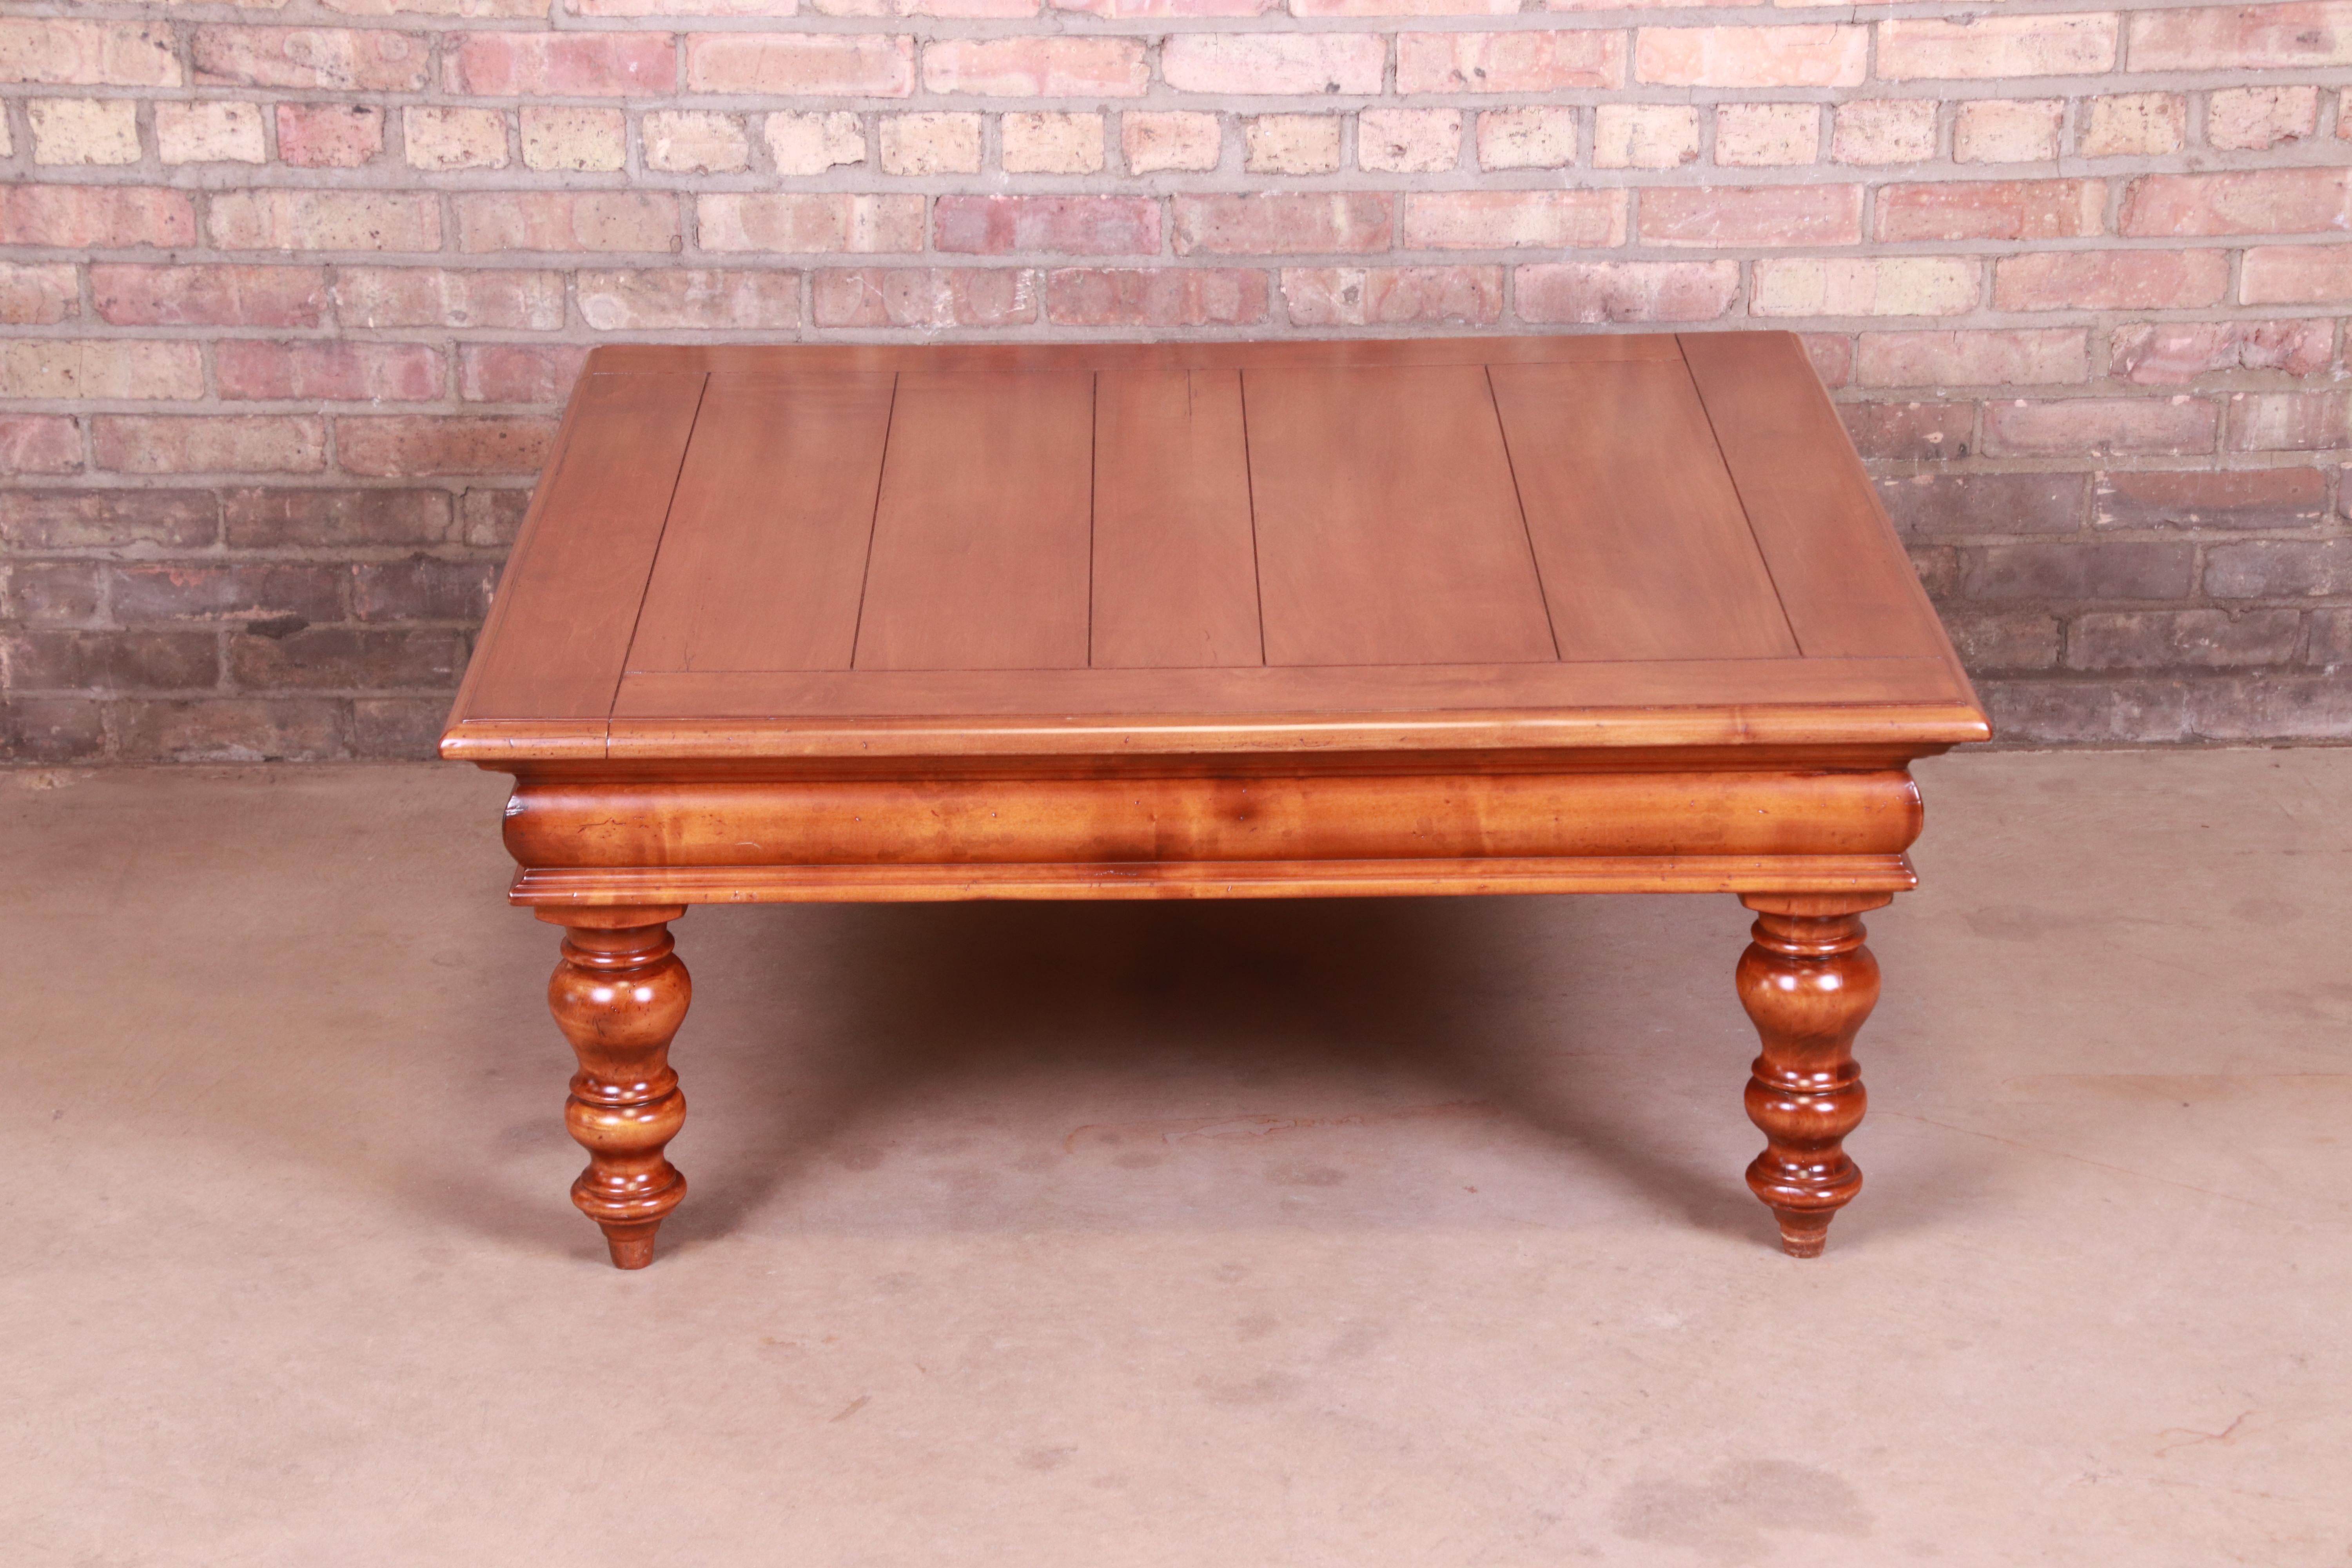 A gorgeous Italian Provincial style maple coffee table with turned legs

By Baker Furniture 